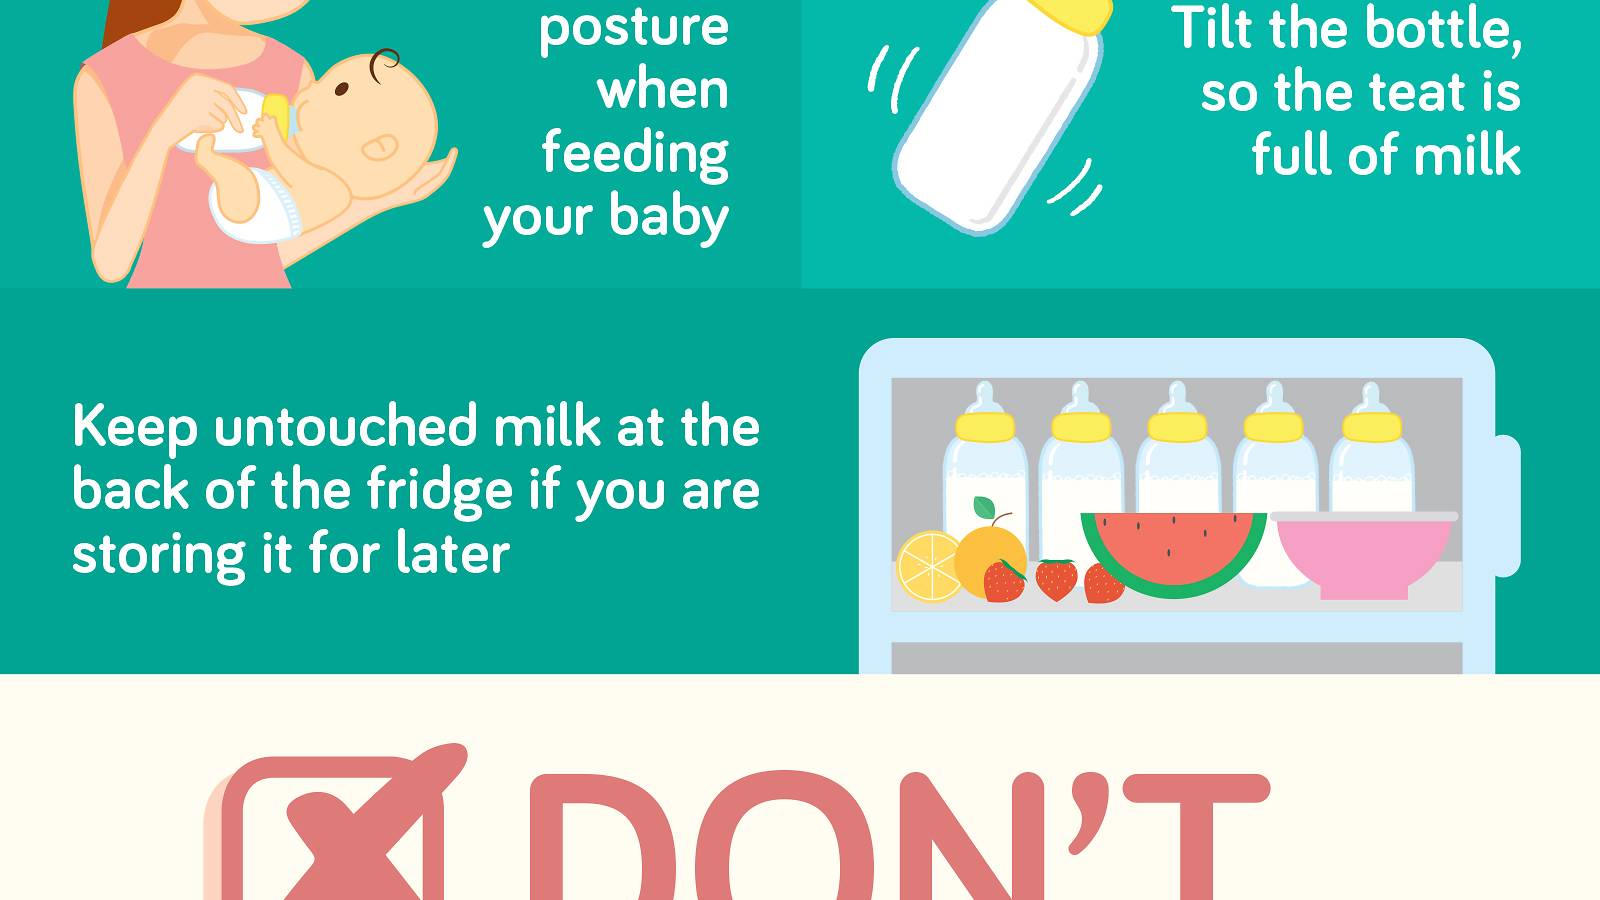 Babies-Do's-and-dont's-of-bottlefeeding-your-baby-safely-[Infographic]_04